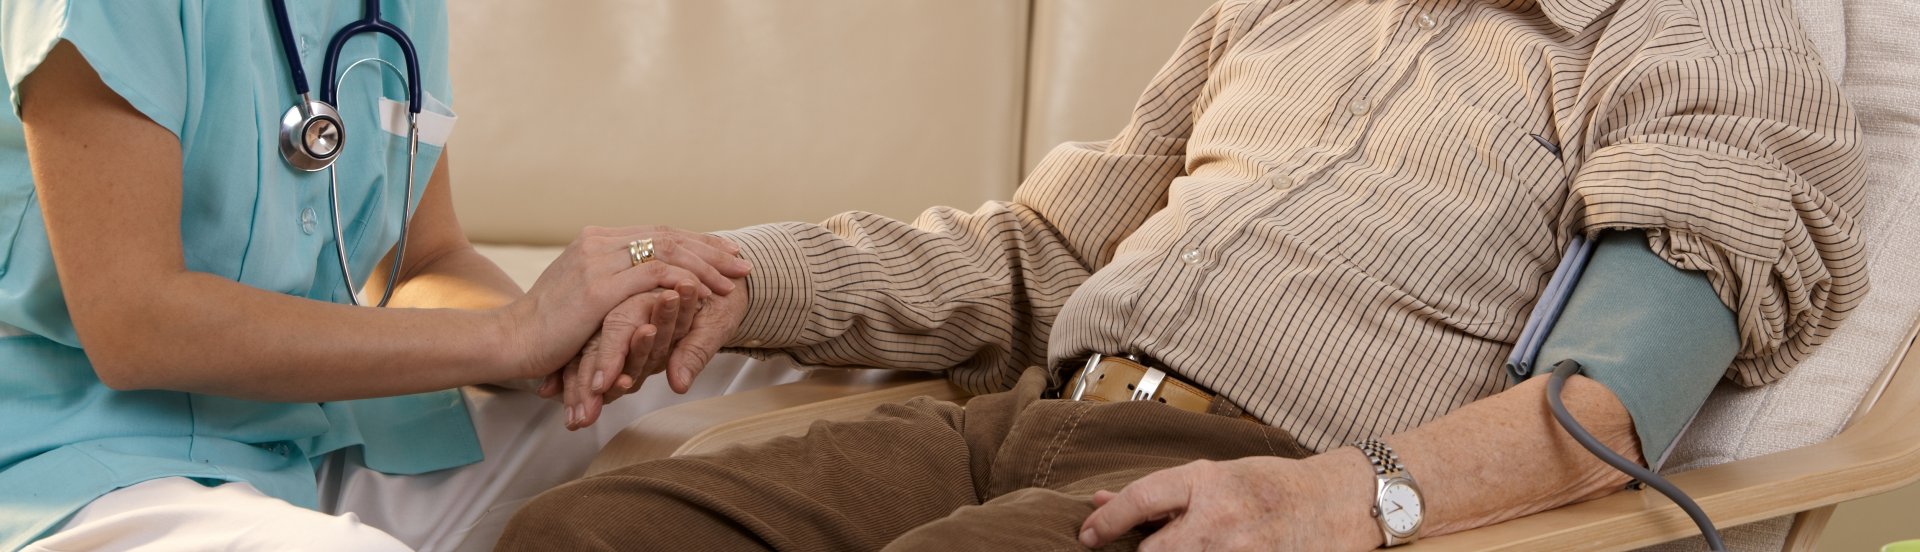 home health aide providing comfort to a senior patient